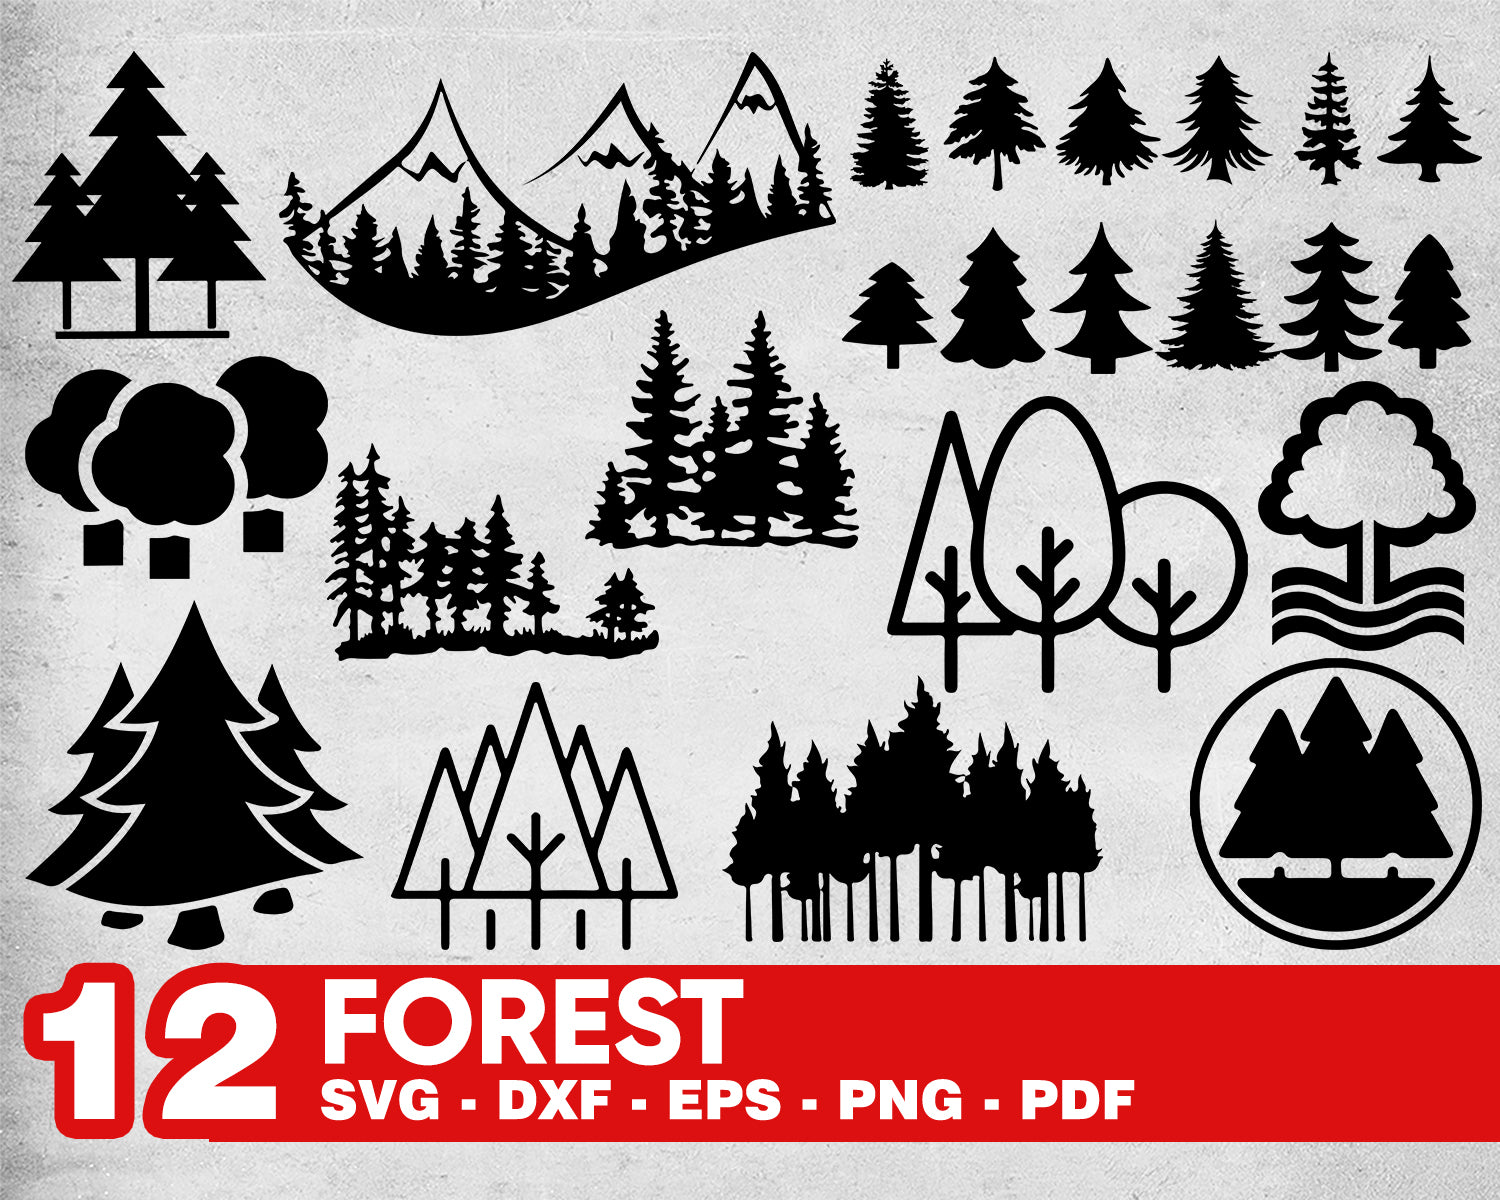 Download Forest Svg Forest Svg Tree Svg Woods Svg Forest Silhouette Forest Clipartic